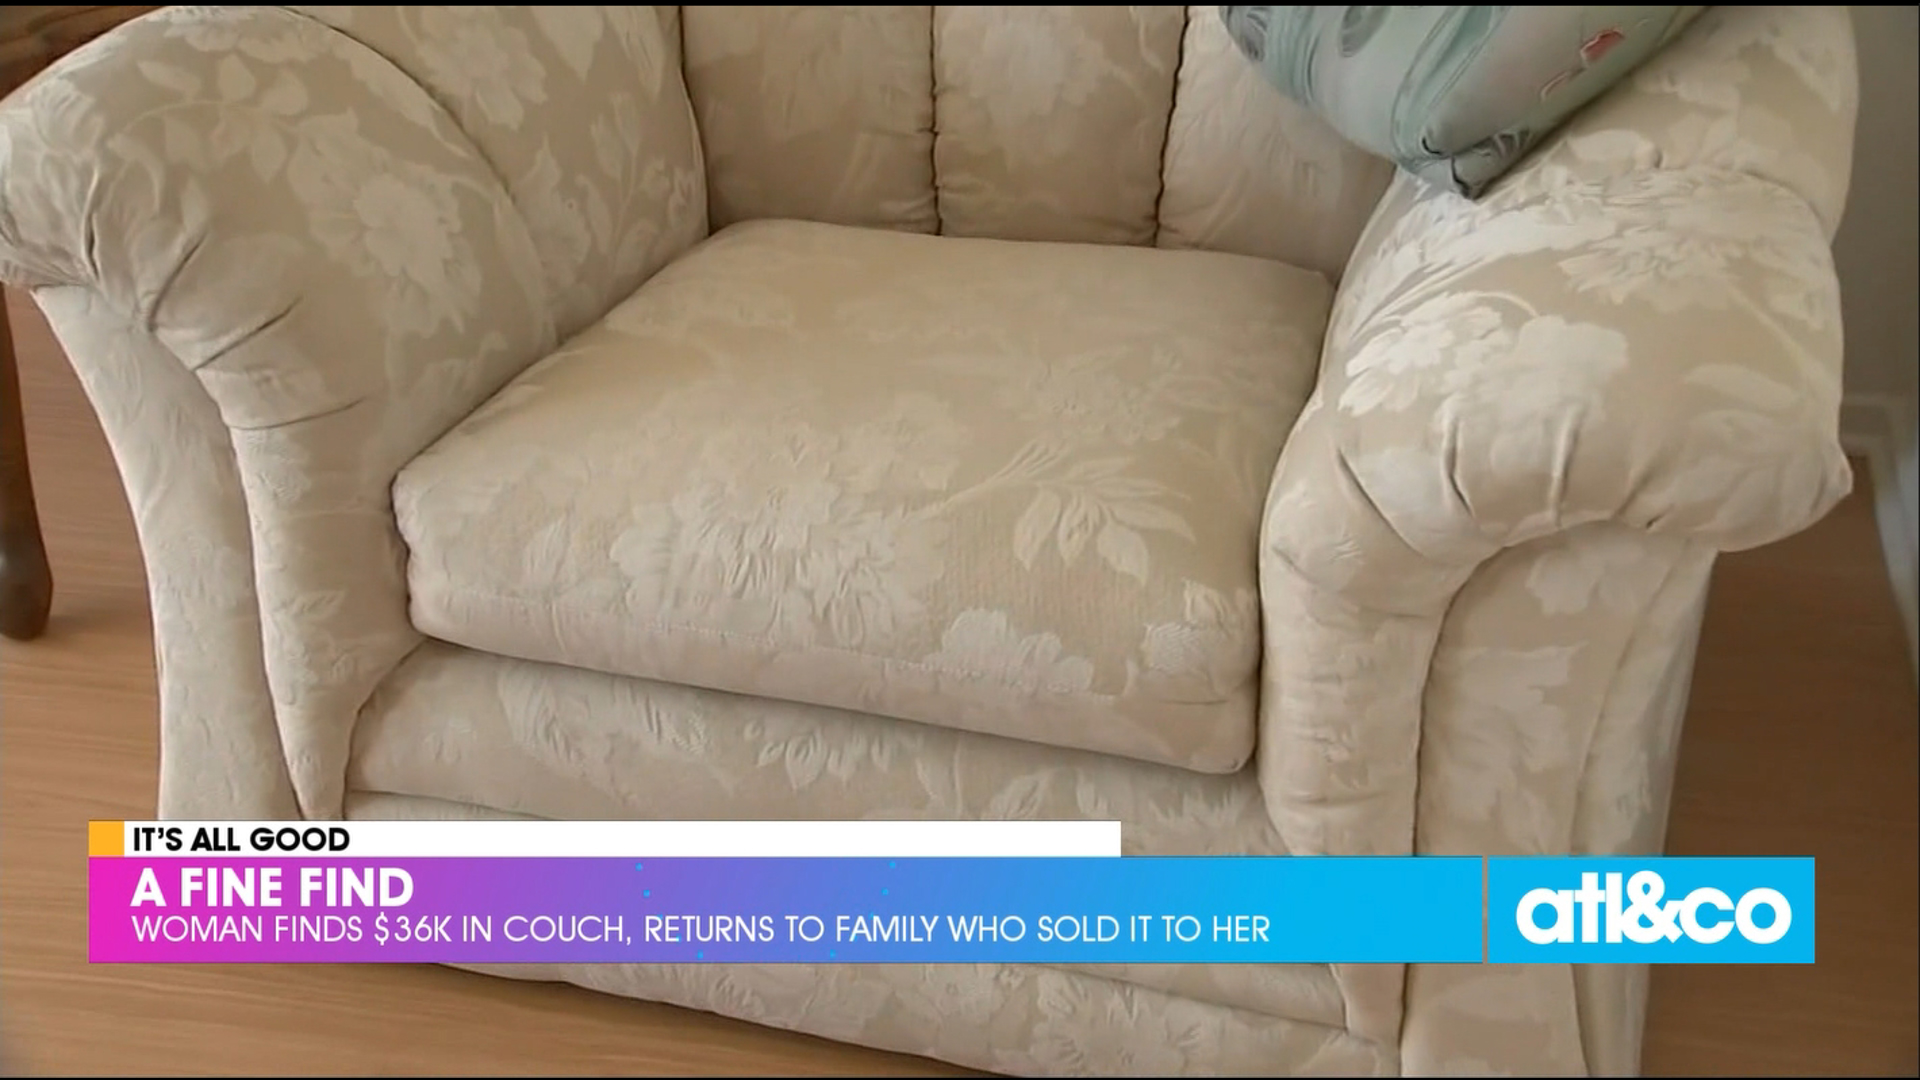 A woman got a free couch off Craigslist and found $36,000 in the cushion.